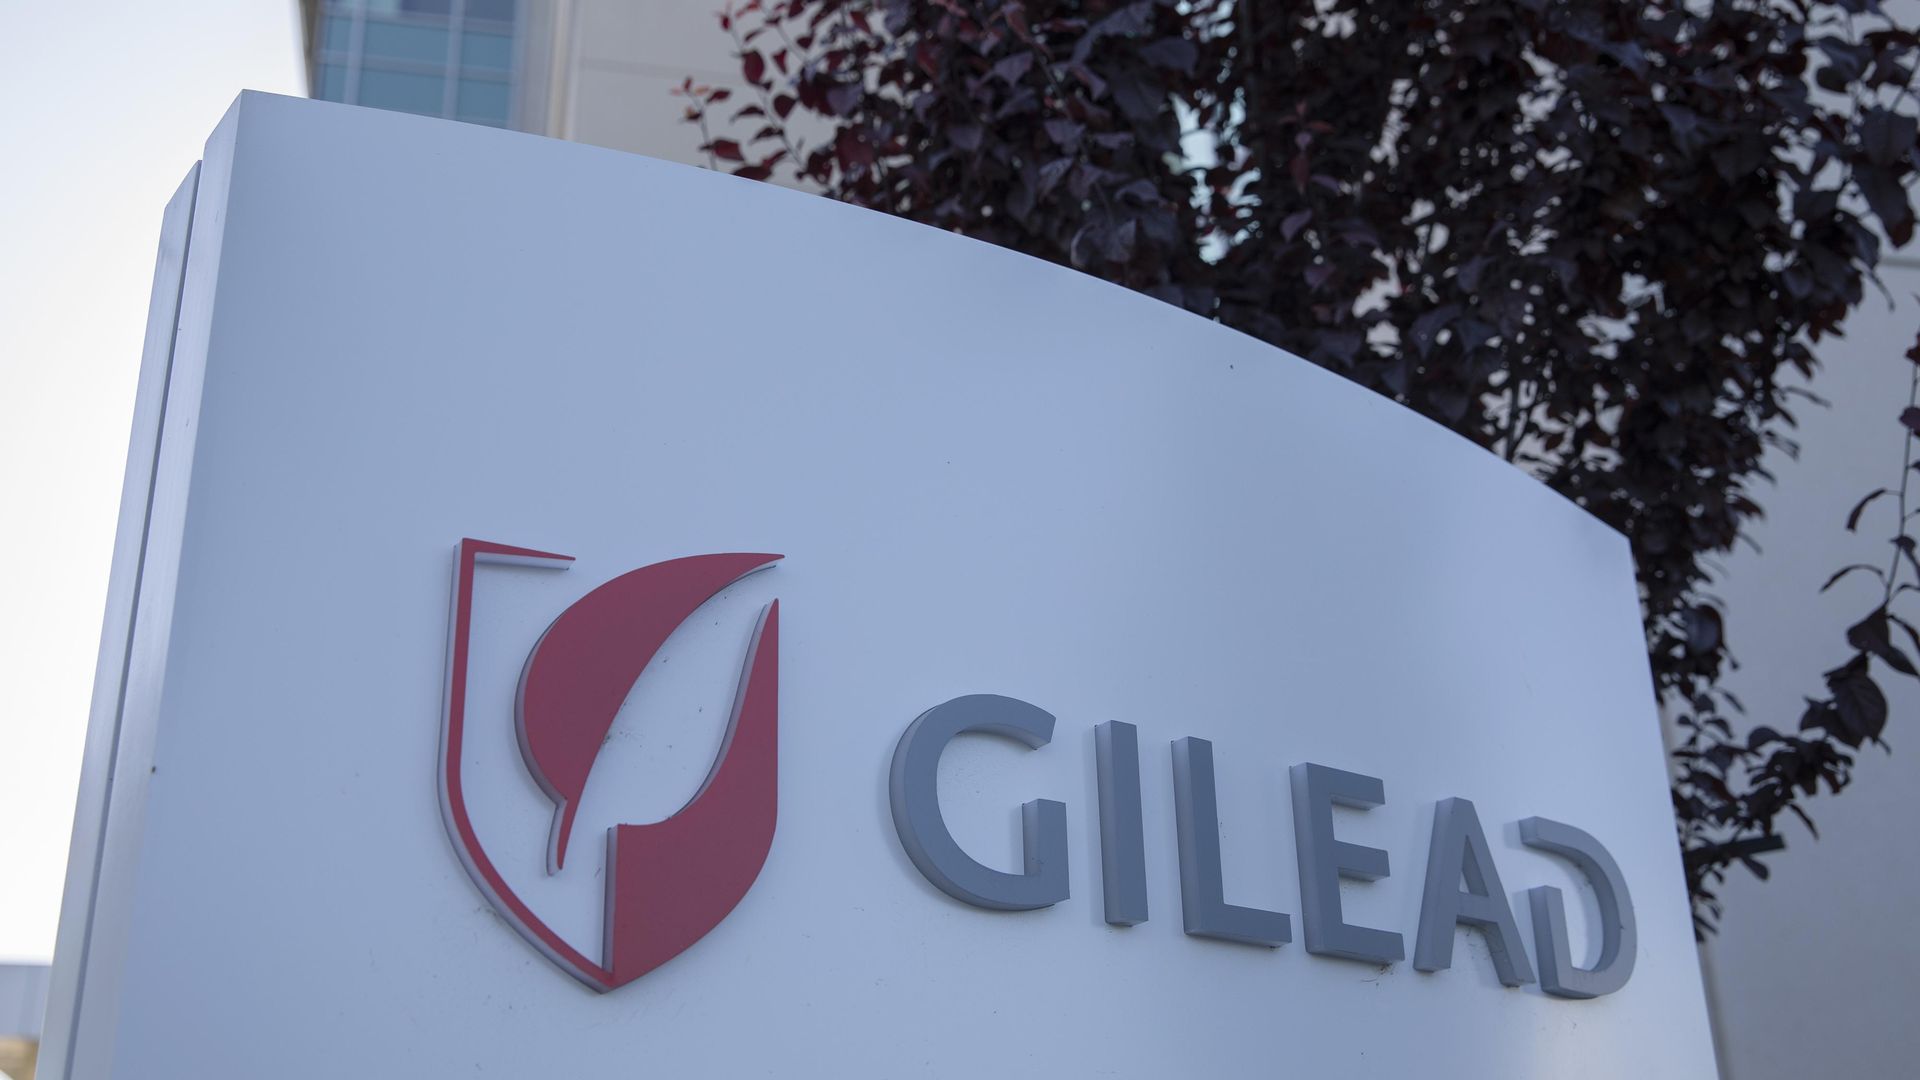 Gilead's white and red logo outside of its headquarters building.